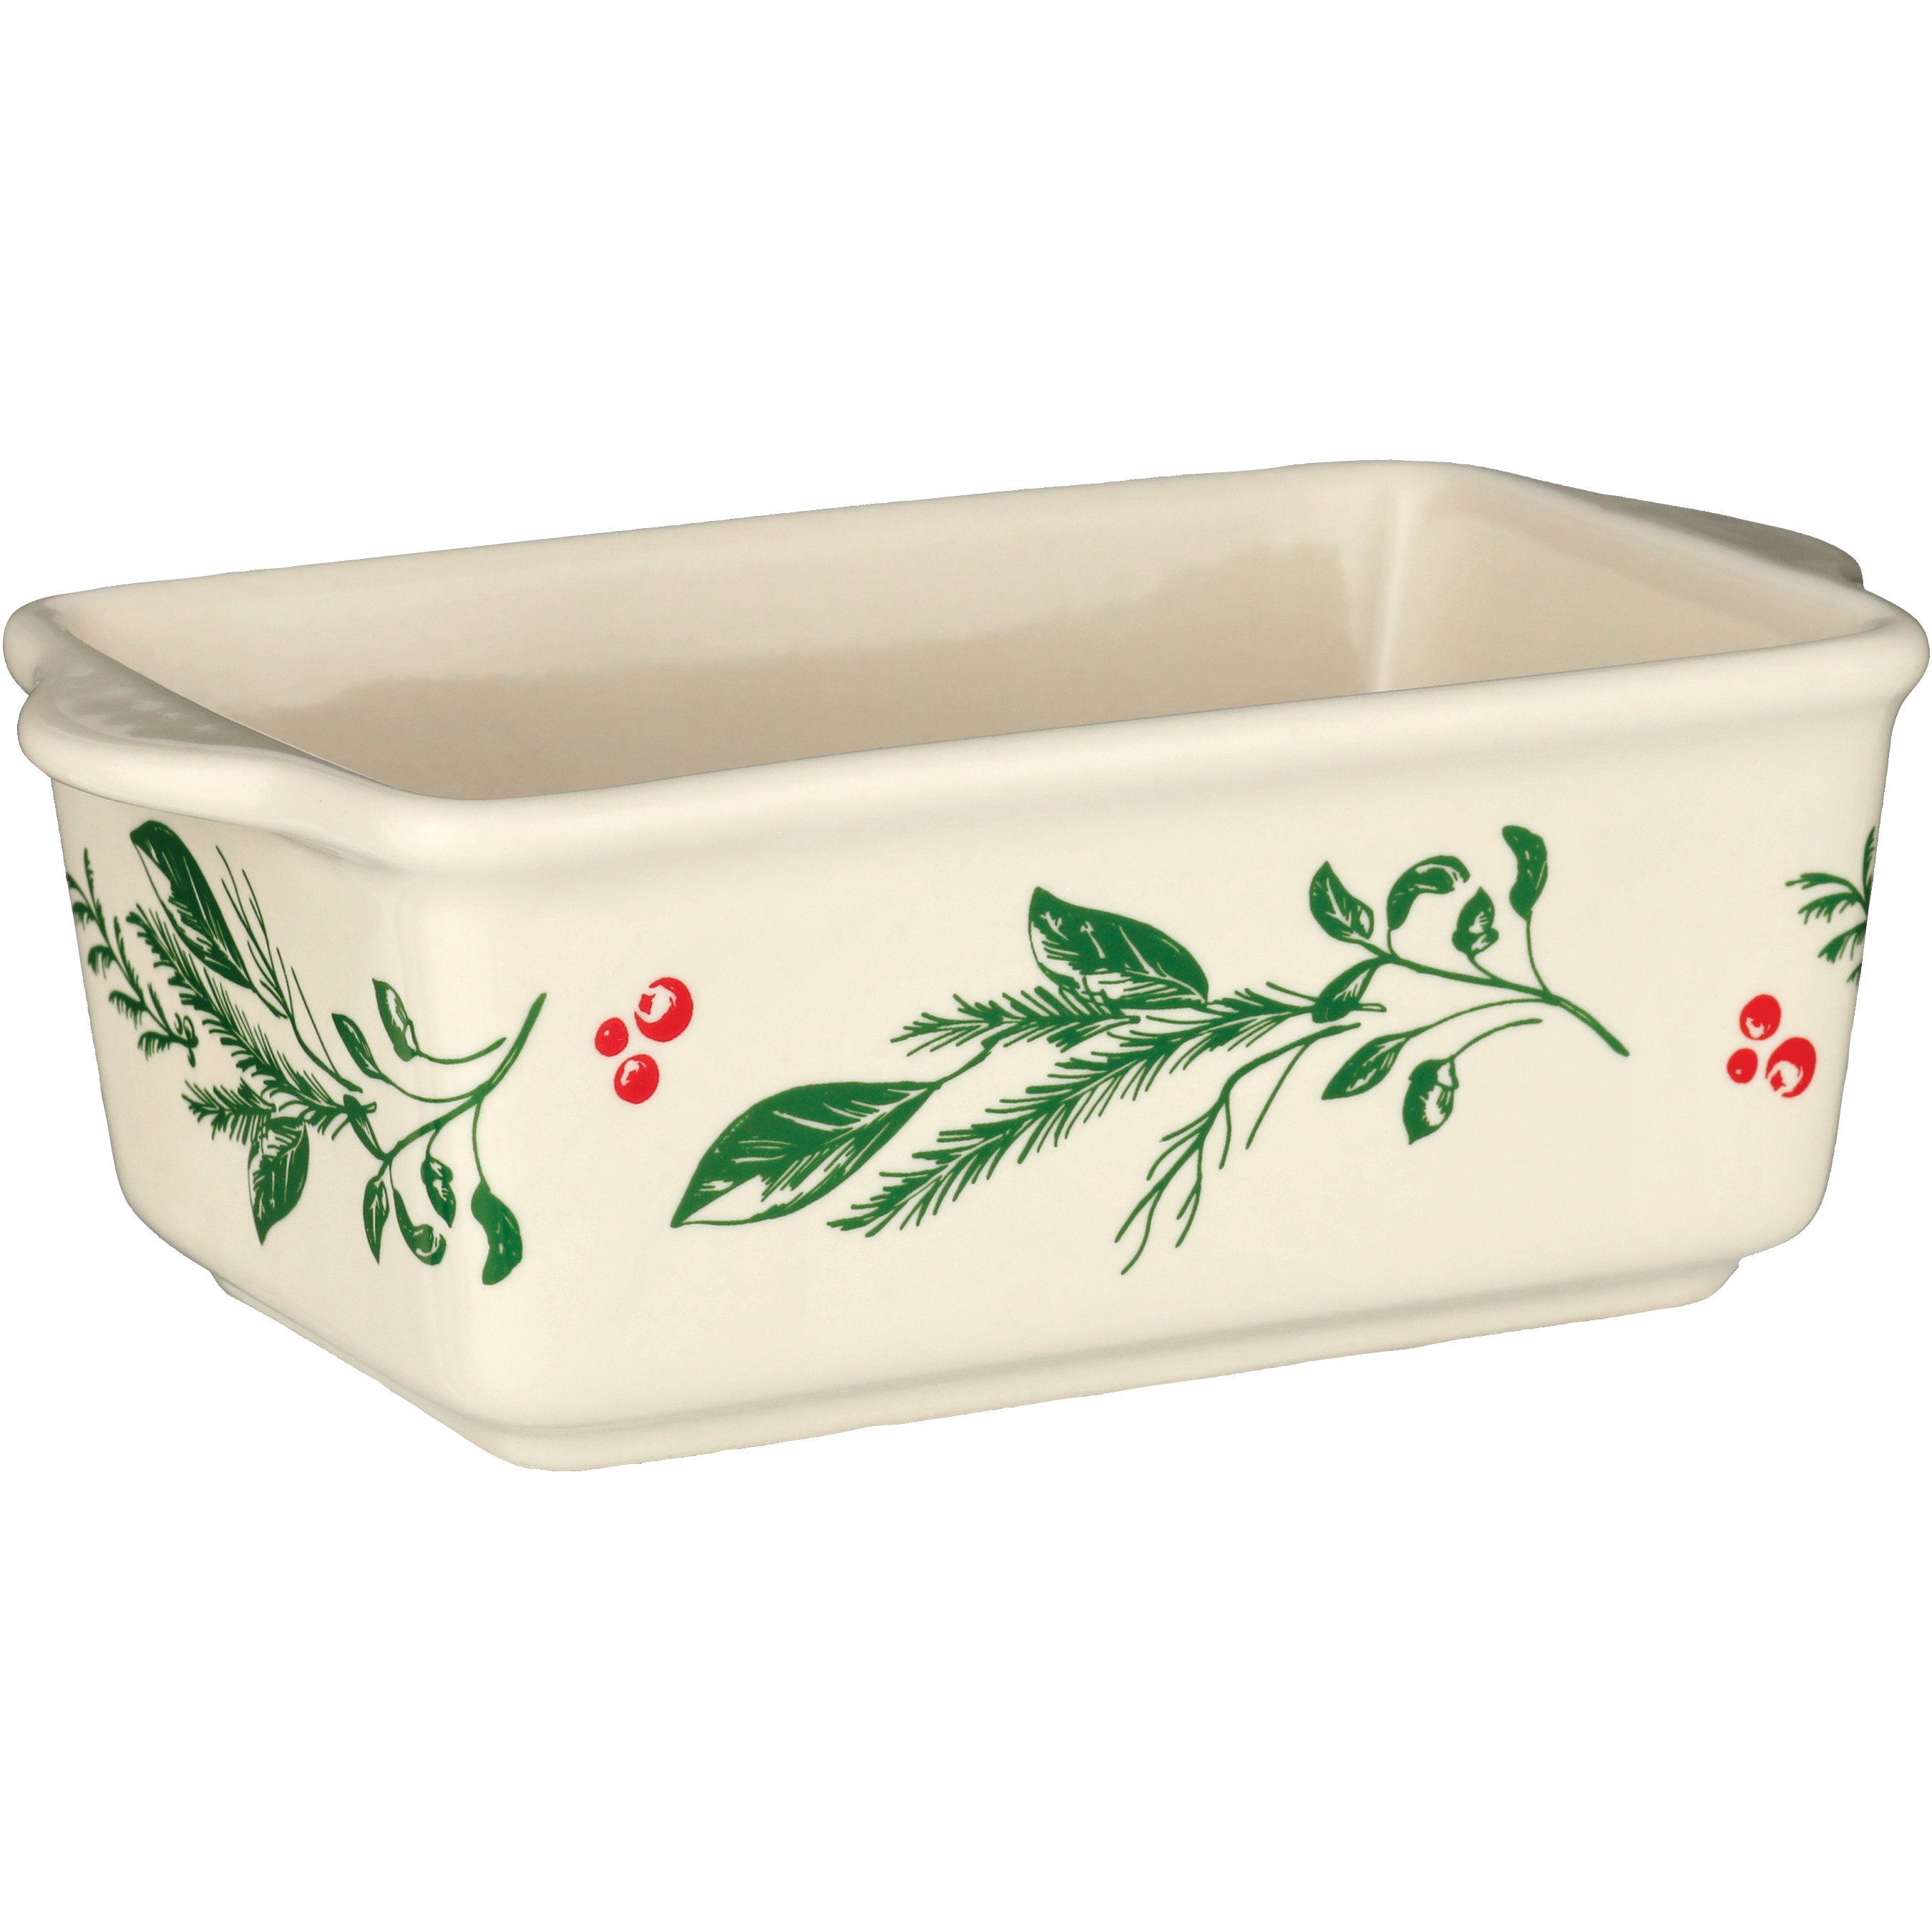 Greenbrier Christmas Holiday Ceramic Mini Loaf Pans, Nonstick